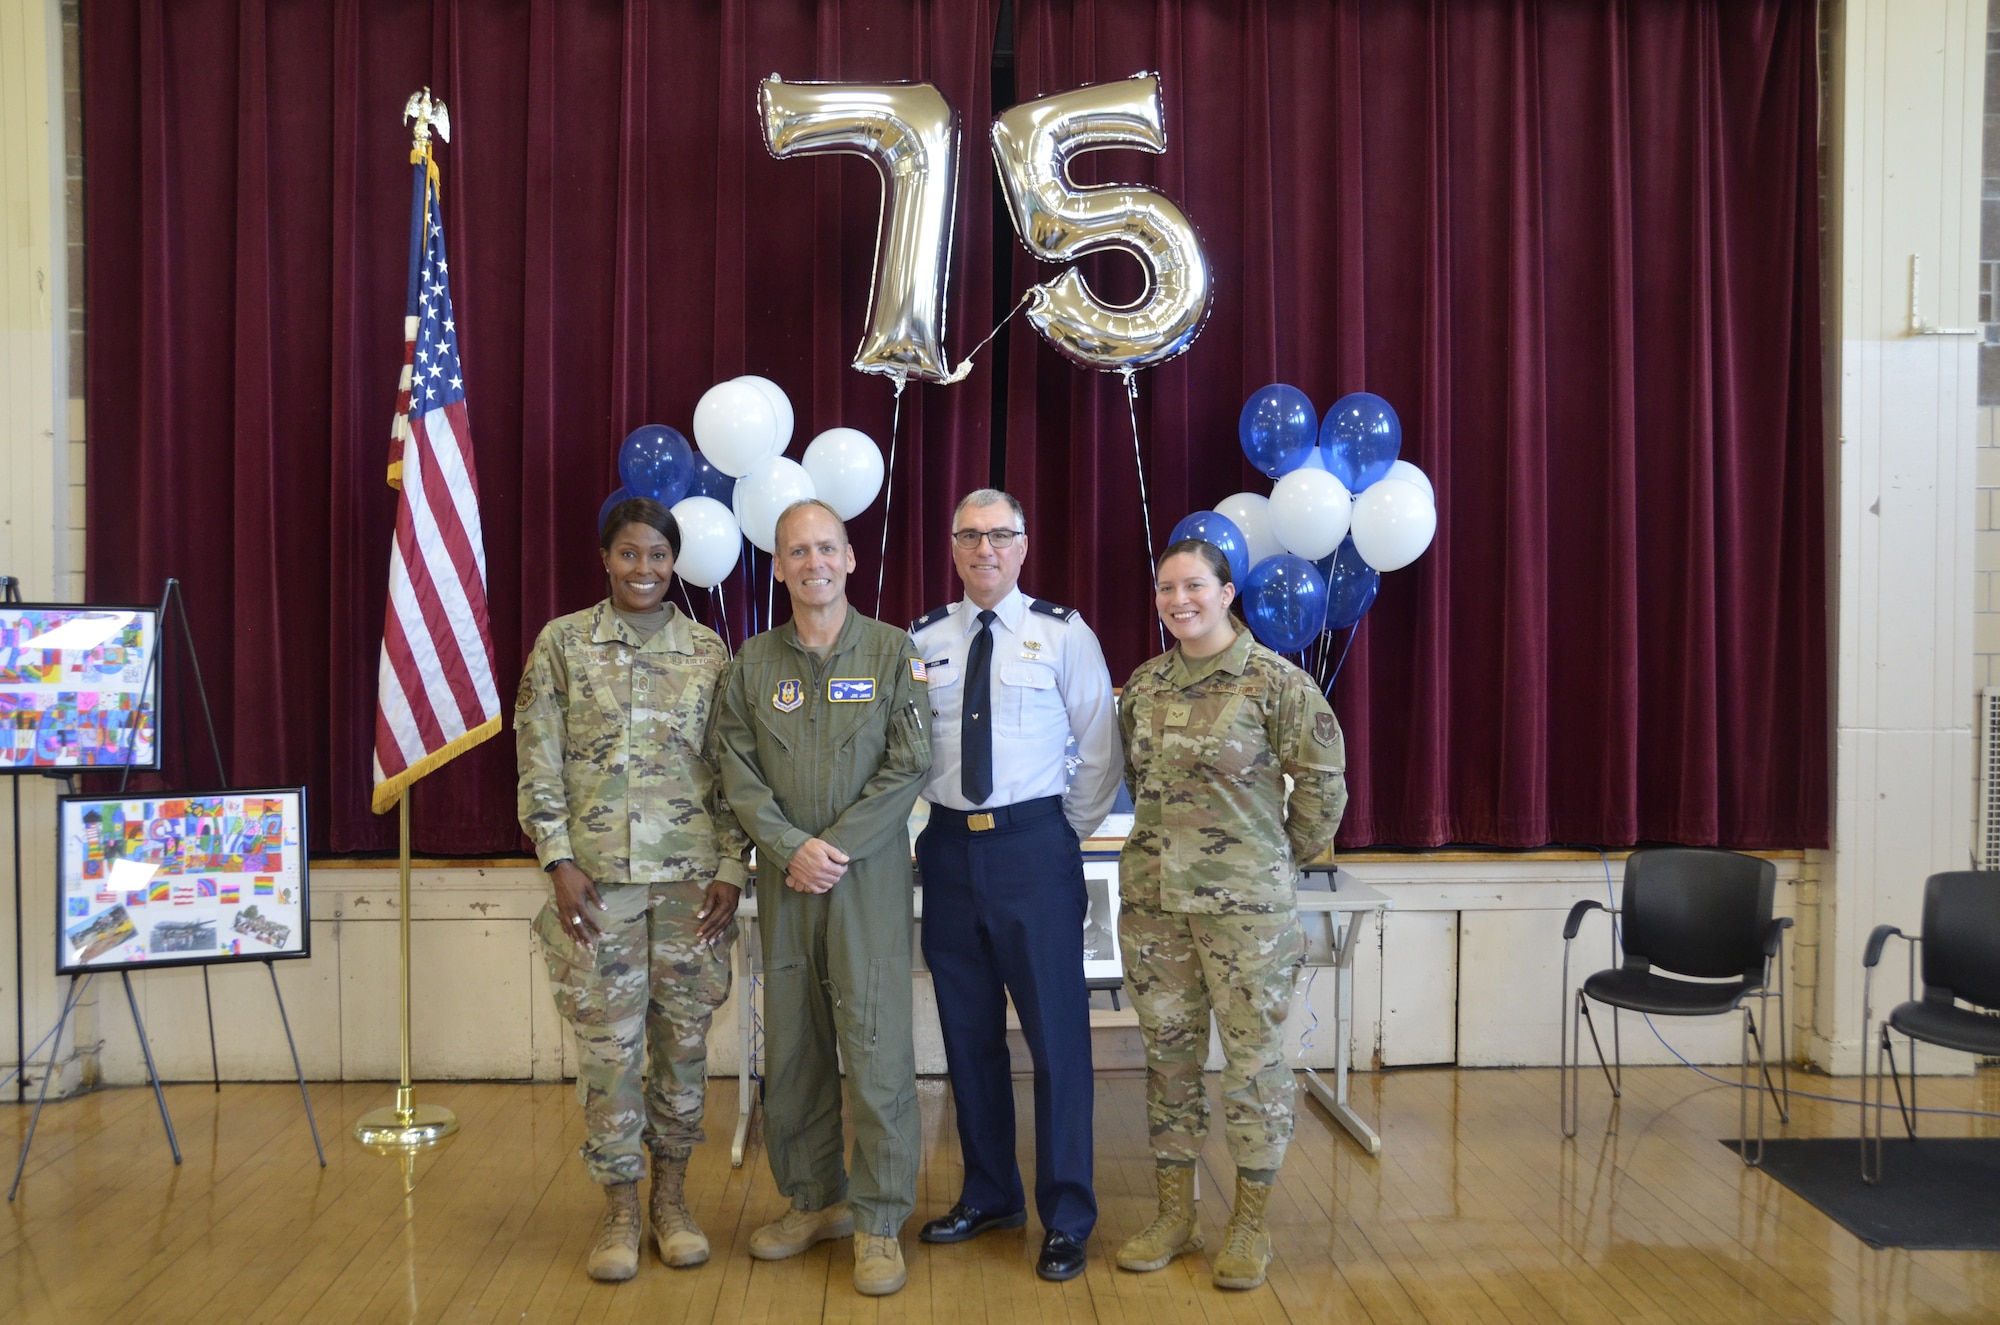 Children at Chicopee’s Herbert Bowie Elementary School held a 75th Air Force Birthday party, on Sept. 15.